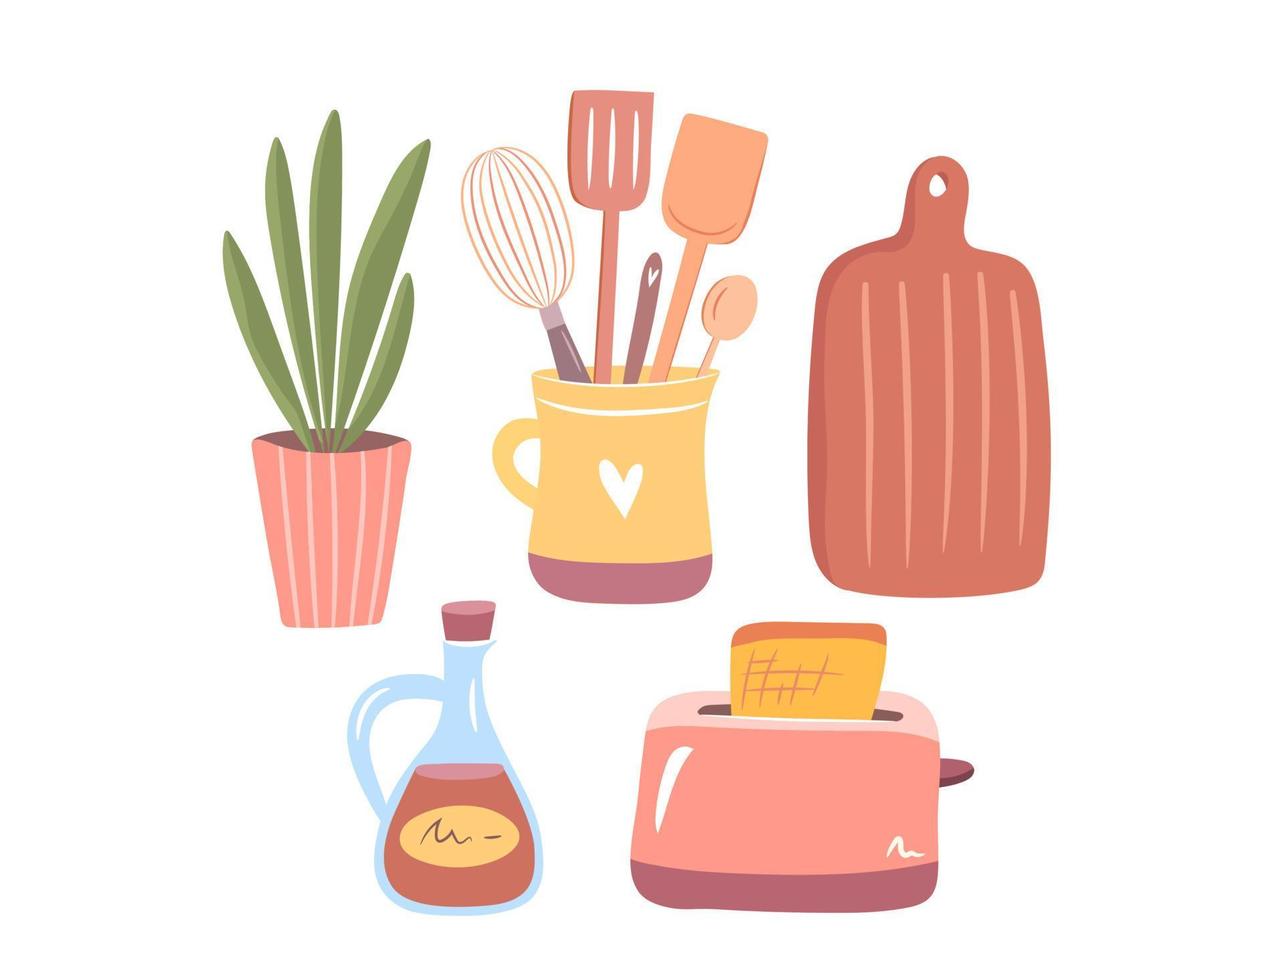 Cozy kitchenware set. Isolated kitchen tools collection - utensils, toaster, cutting board, saucepan, plant. Cute hand drawn vector illustration in flat style.